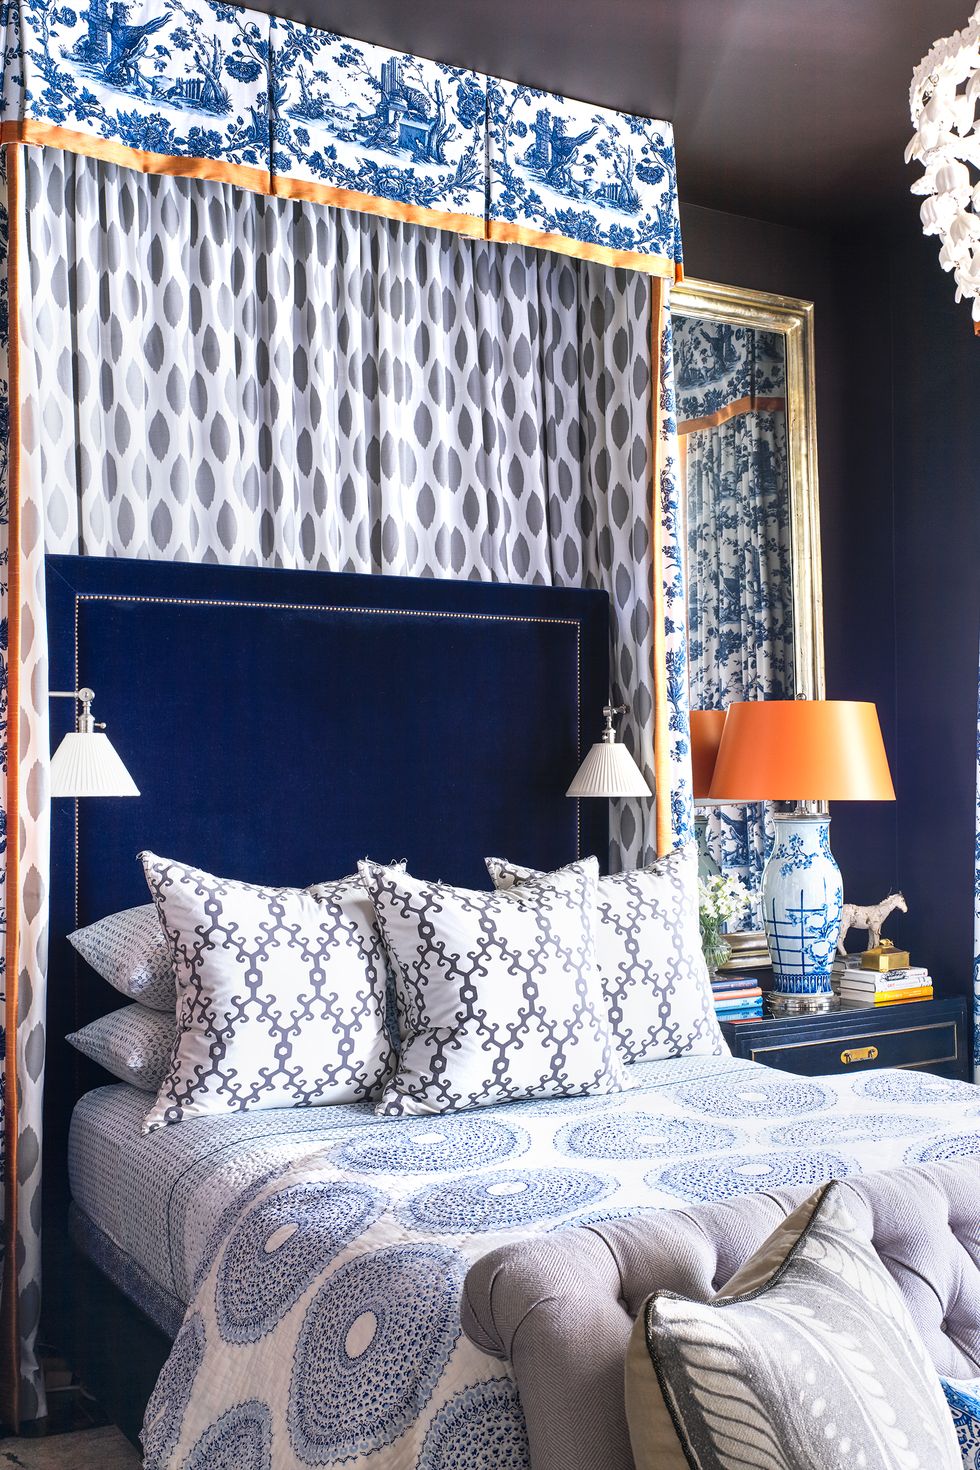 18 Best Blue and White Rooms and Decor - Photos of Pretty Blue and ...